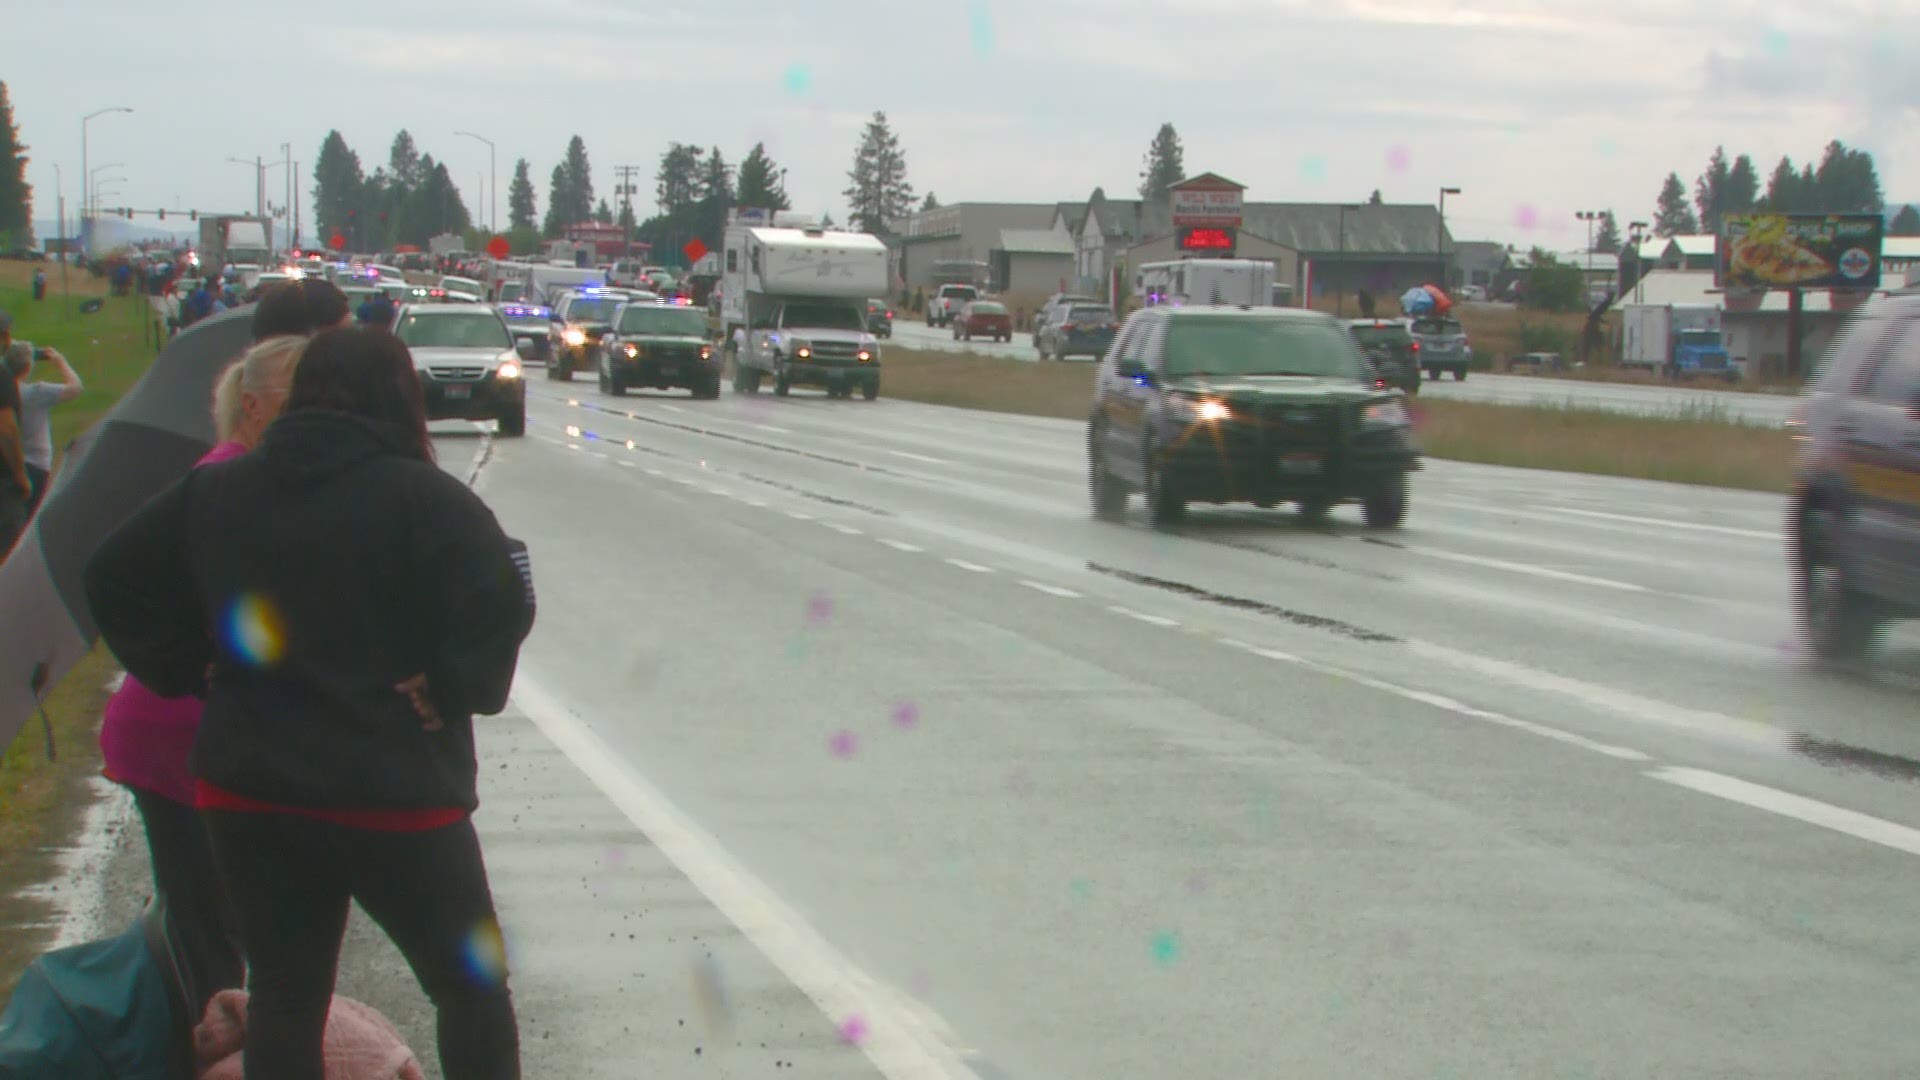 Kootenai County gave a warm hero's welcome to Sgt. Sharp, who is a wounded combat veteran from the Northwest. His wife and her family live in Hayden, where they were headed with their one-year-old daughter.